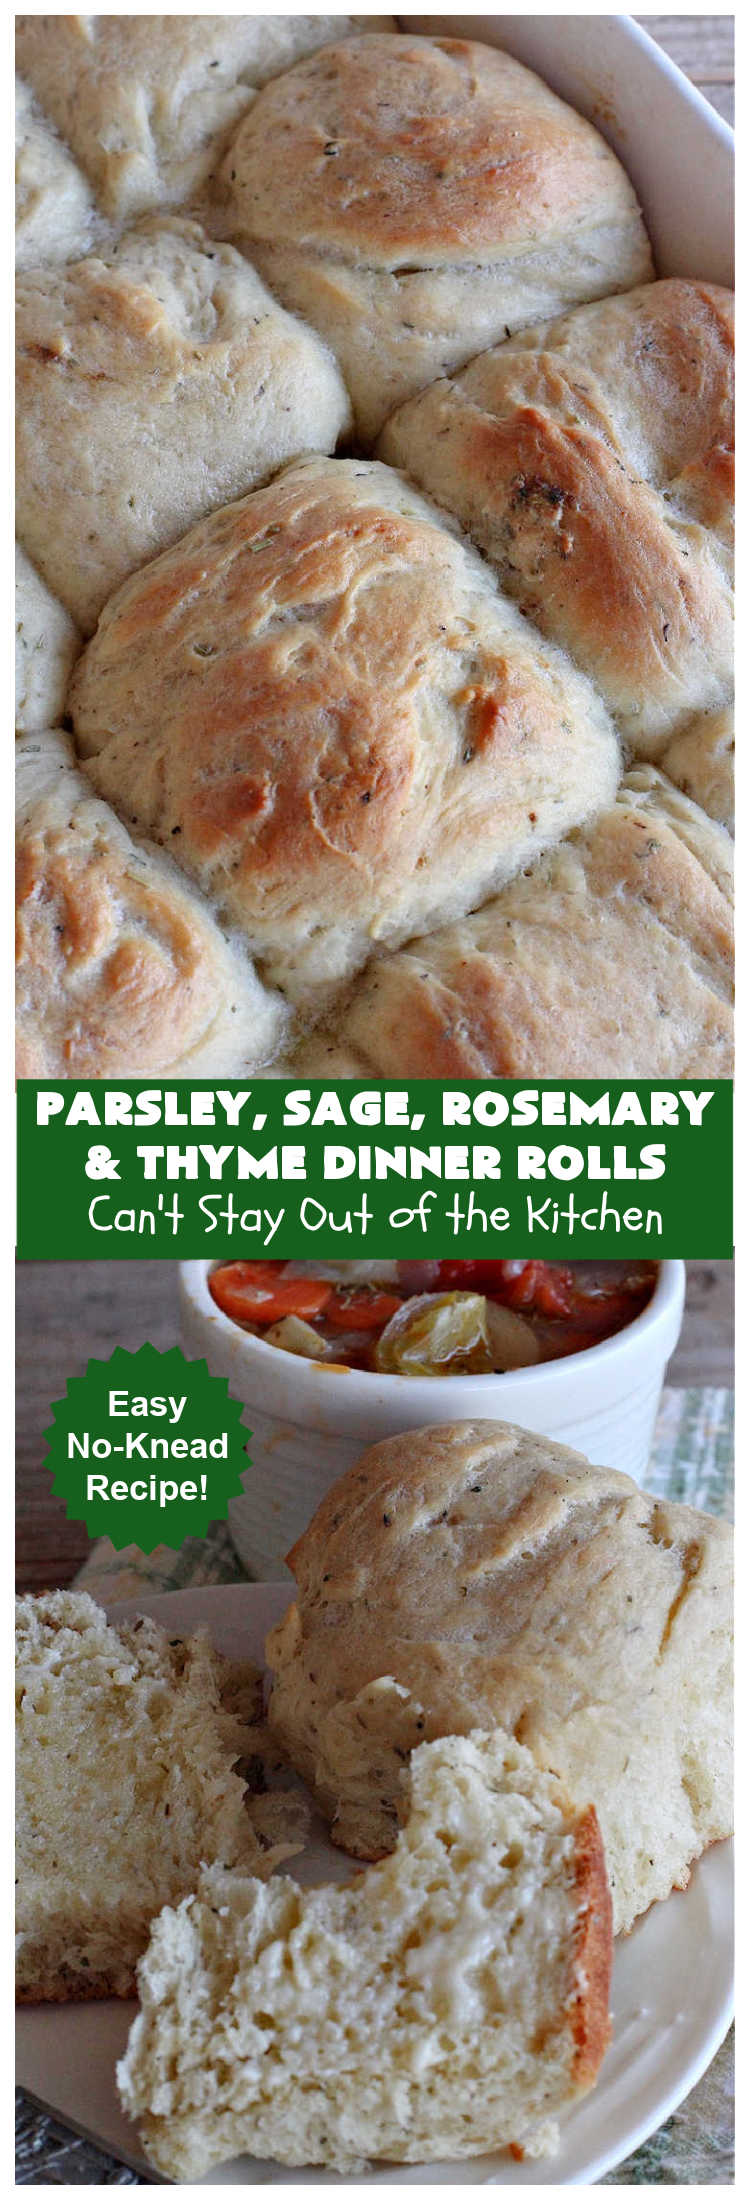 Parsley, Sage, Rosemary & Thyme Dinner Rolls | Can't Stay Out of the Kitchen